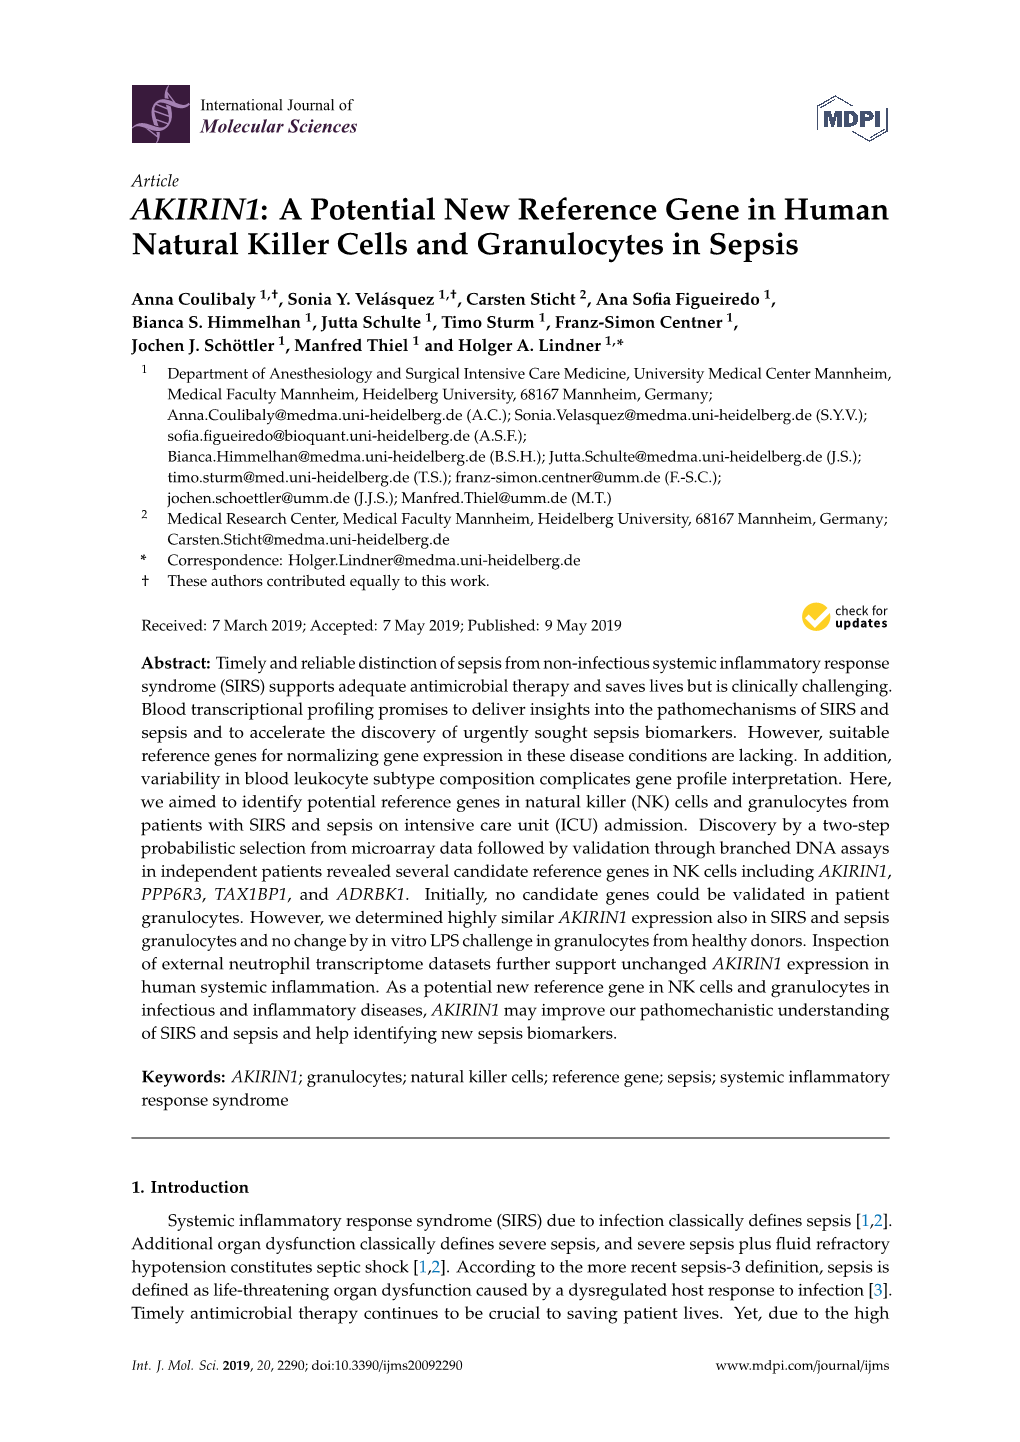 A Potential New Reference Gene in Human Natural Killer Cells and Granulocytes in Sepsis